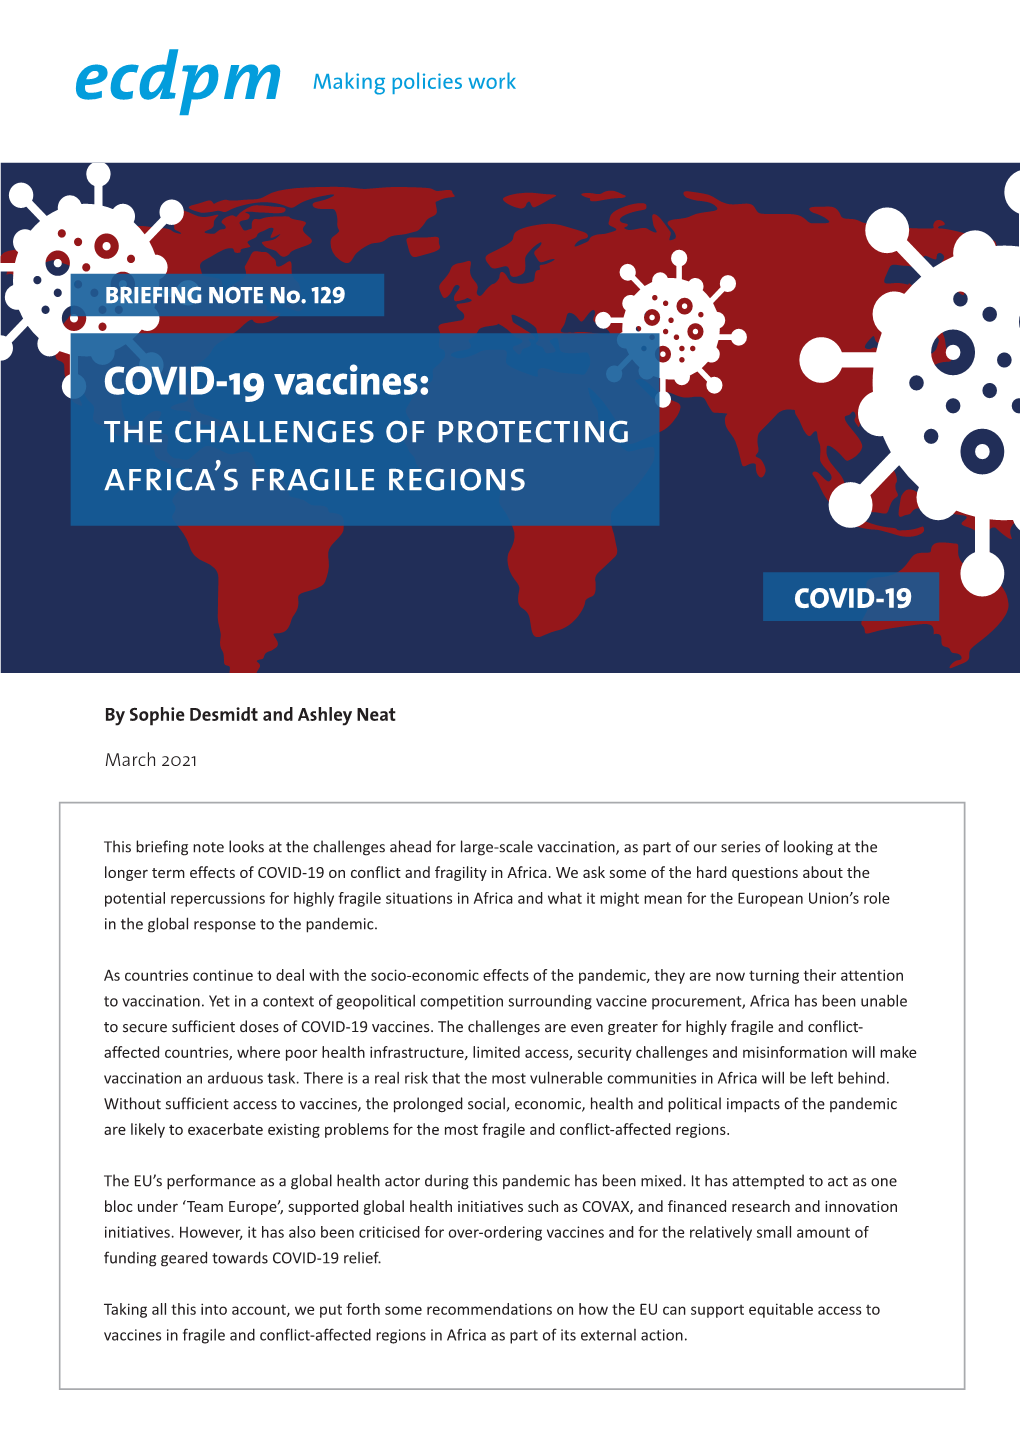 COVID-19 Vaccines: the Challenges of Protecting Africa’S Fragile Regions